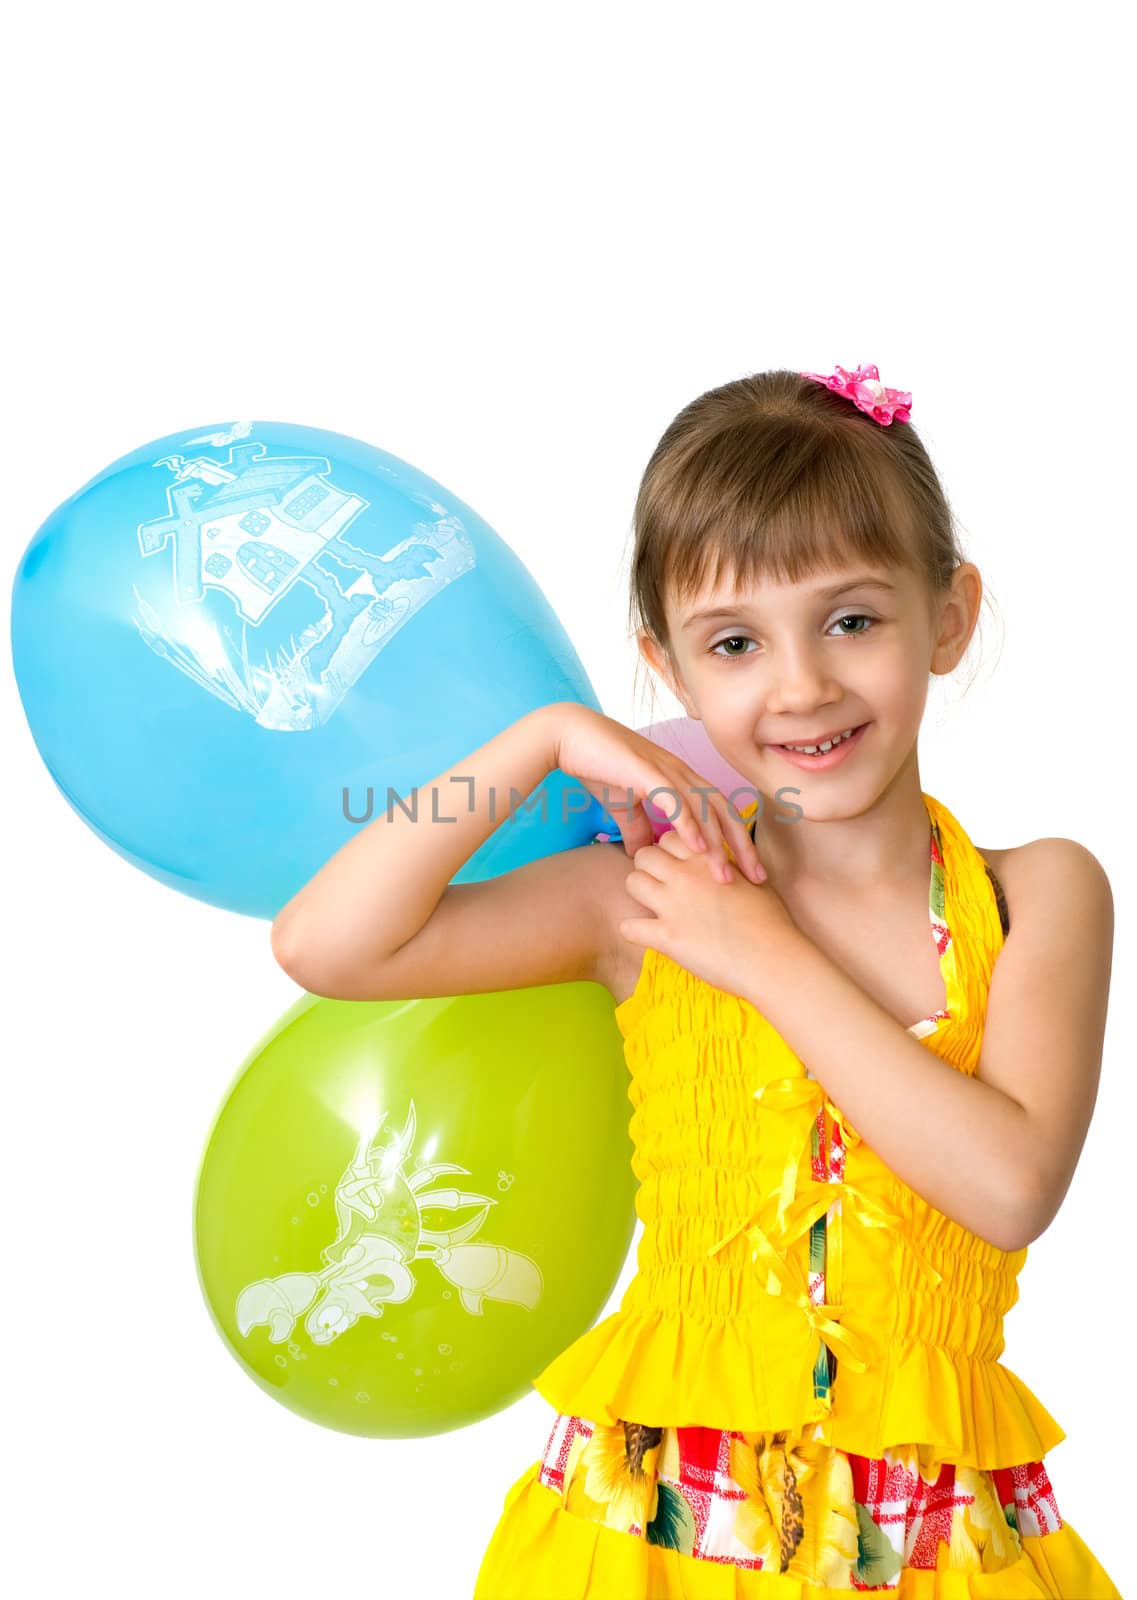 The girl in yellow clothes with balloons
